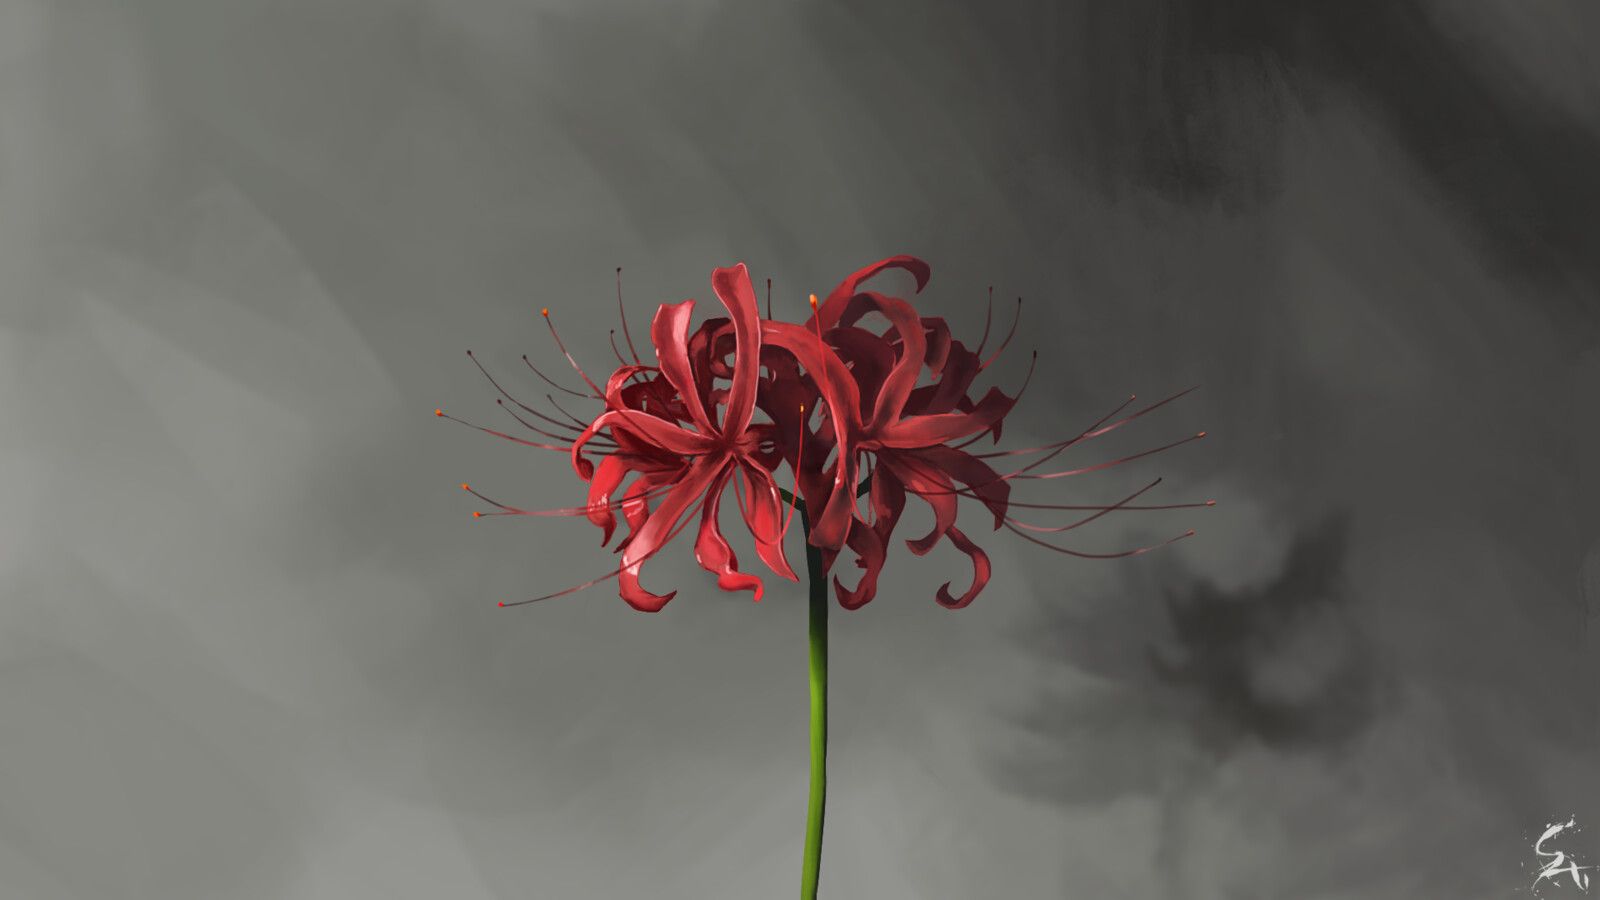 Red Spider Lily Wallpapers - Wallpaper Cave